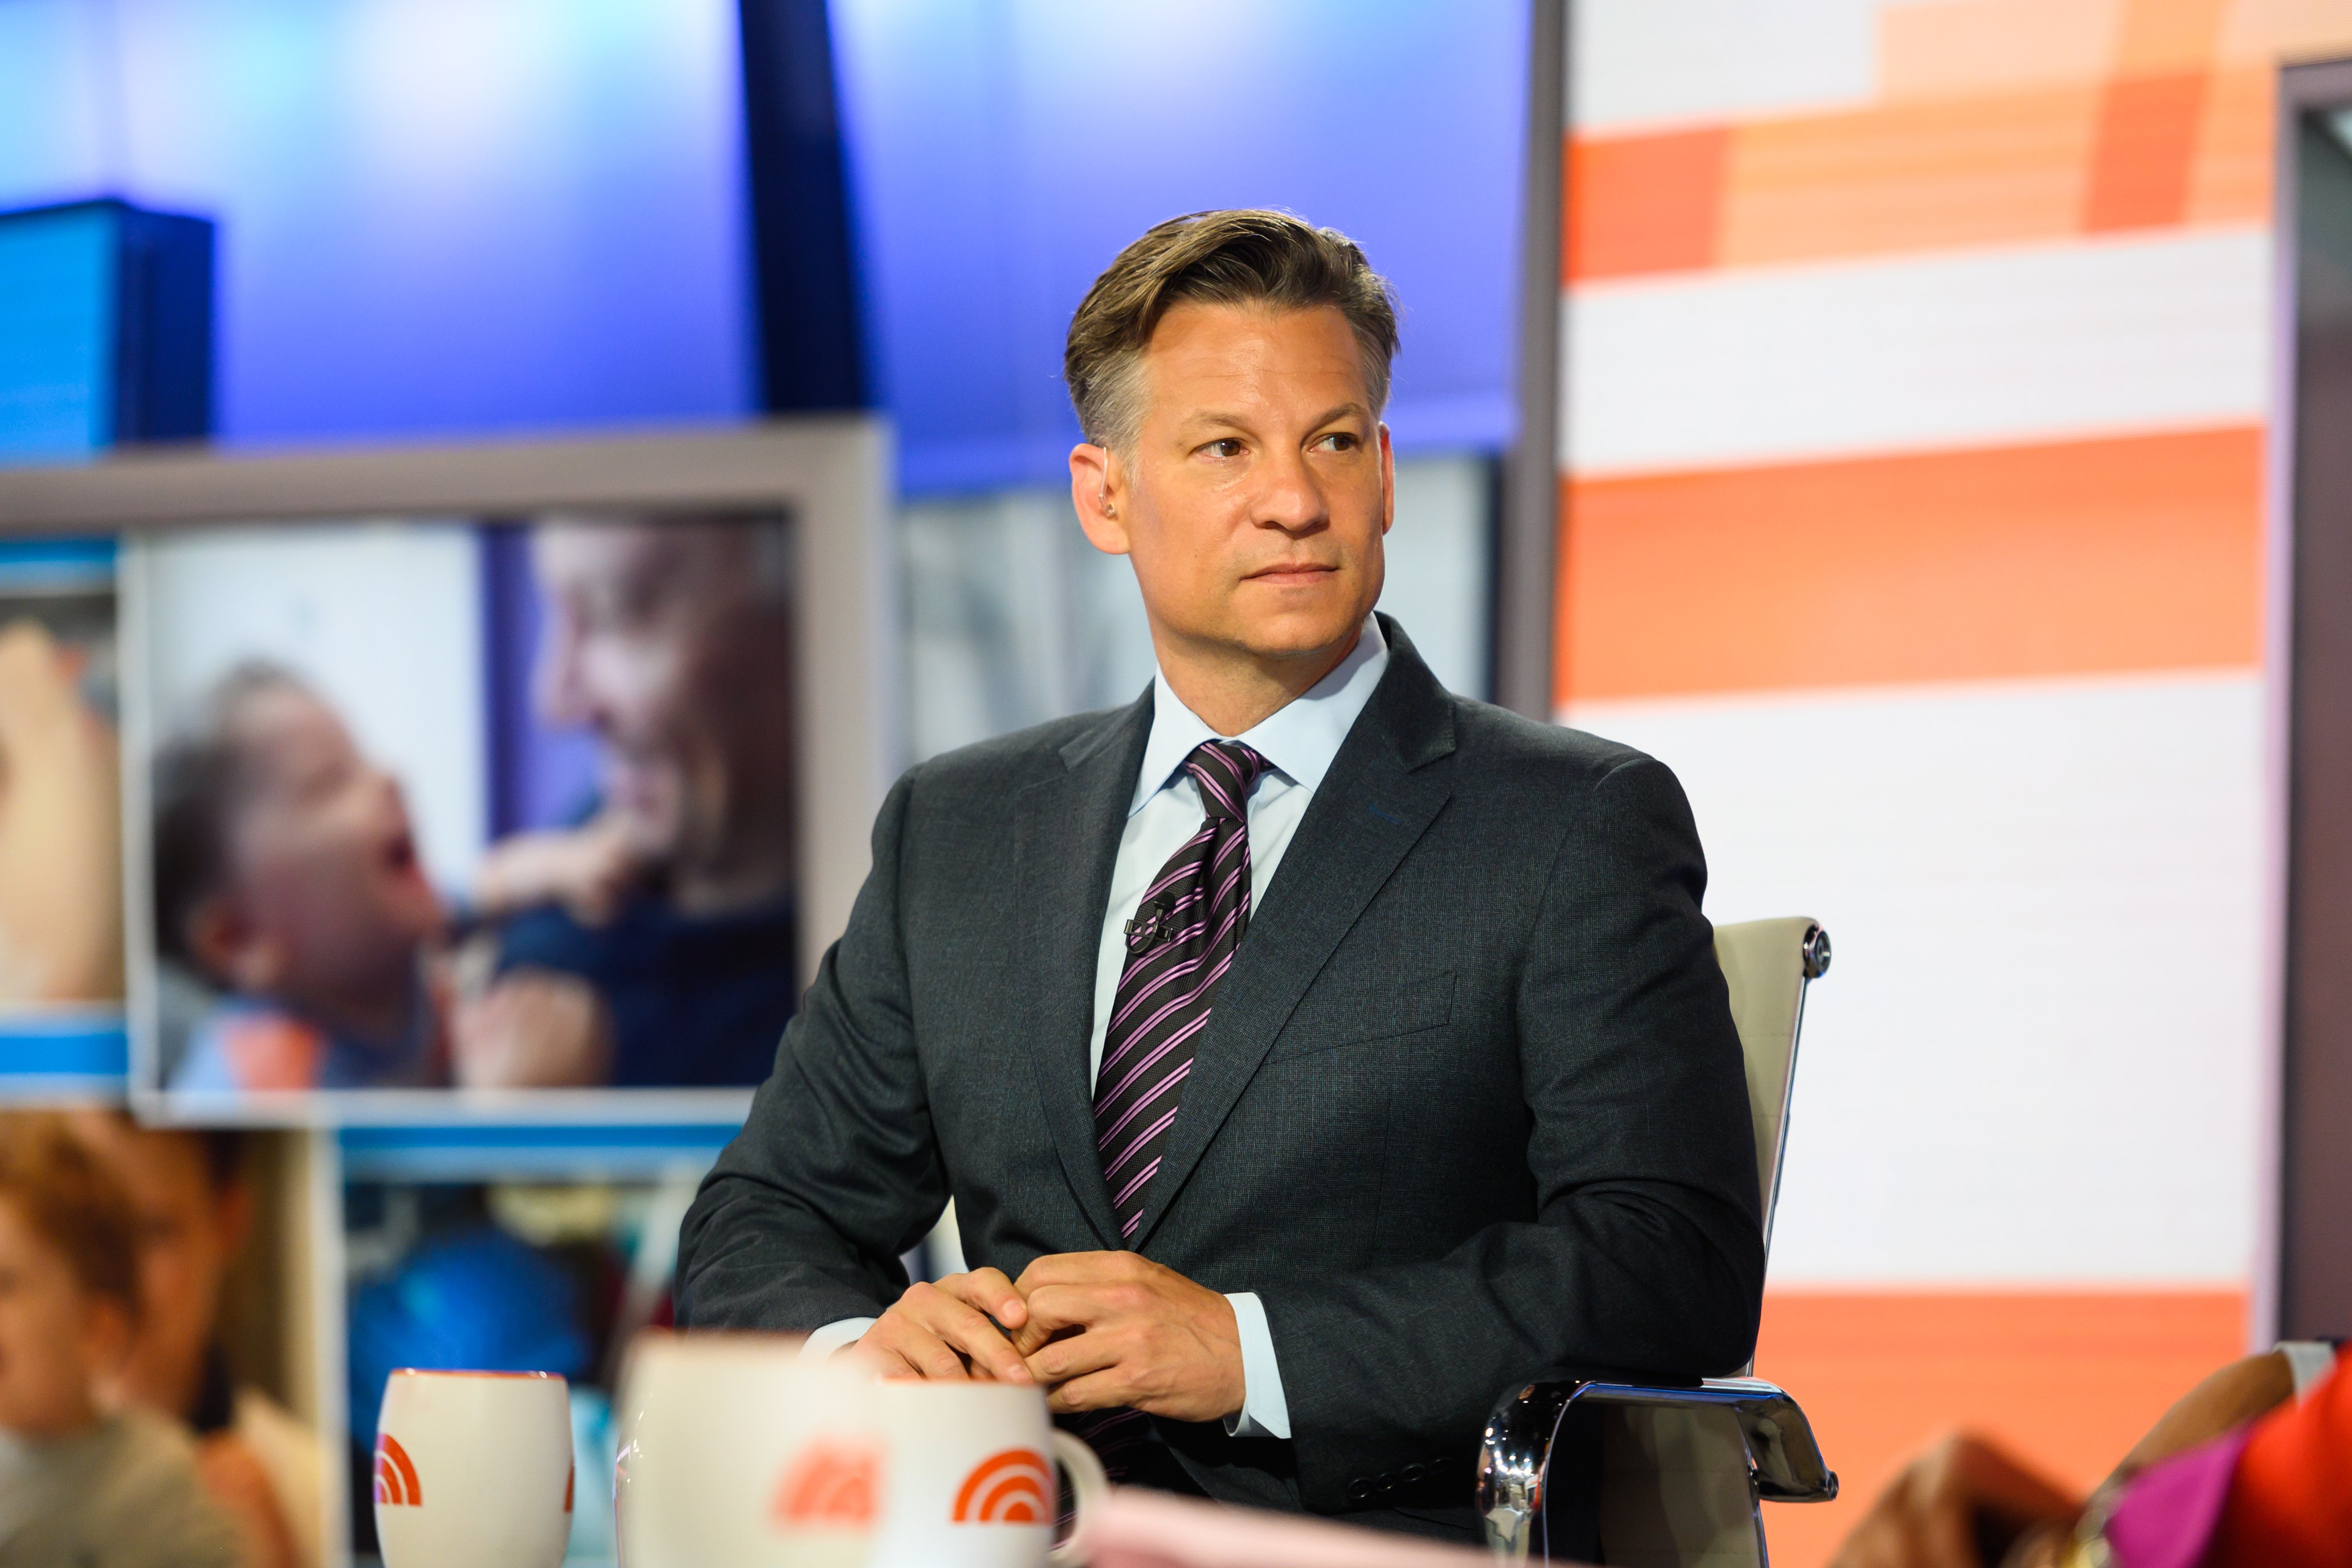 Richard Engel on Friday, March 15, 2019 | Source: Getty Images